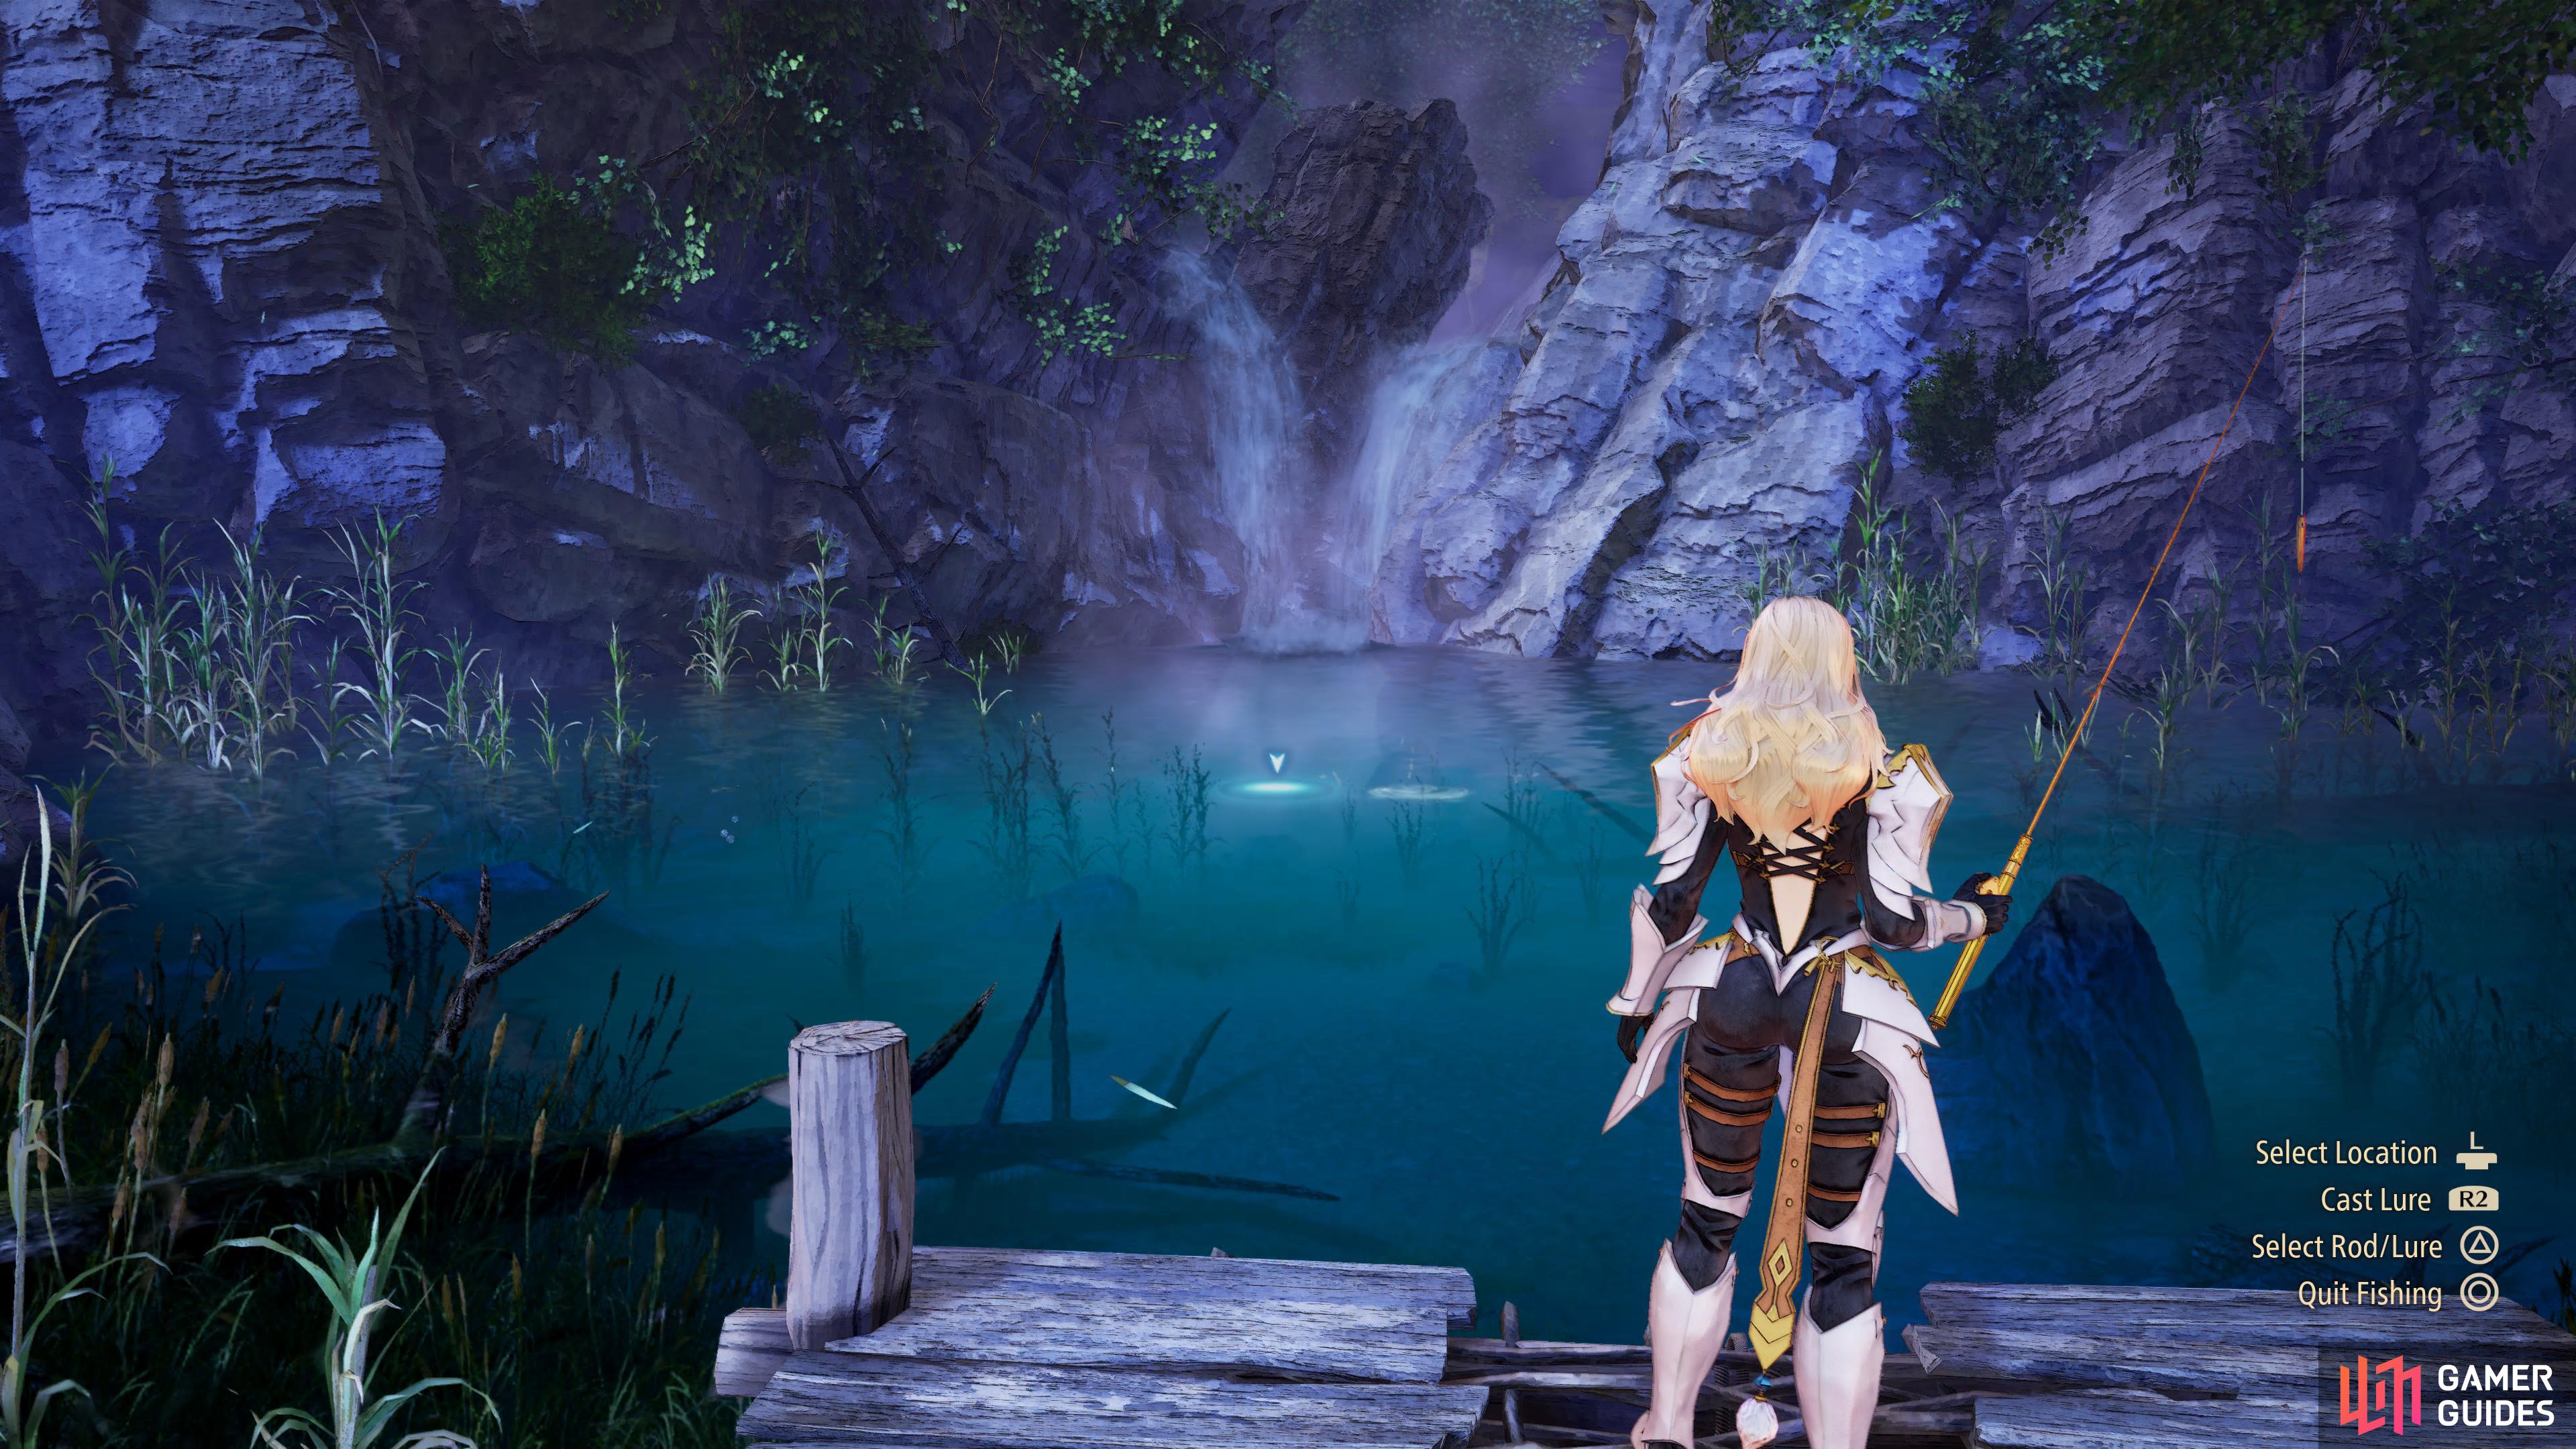 Where to find all fishing rods and lures in Tales of Arise.